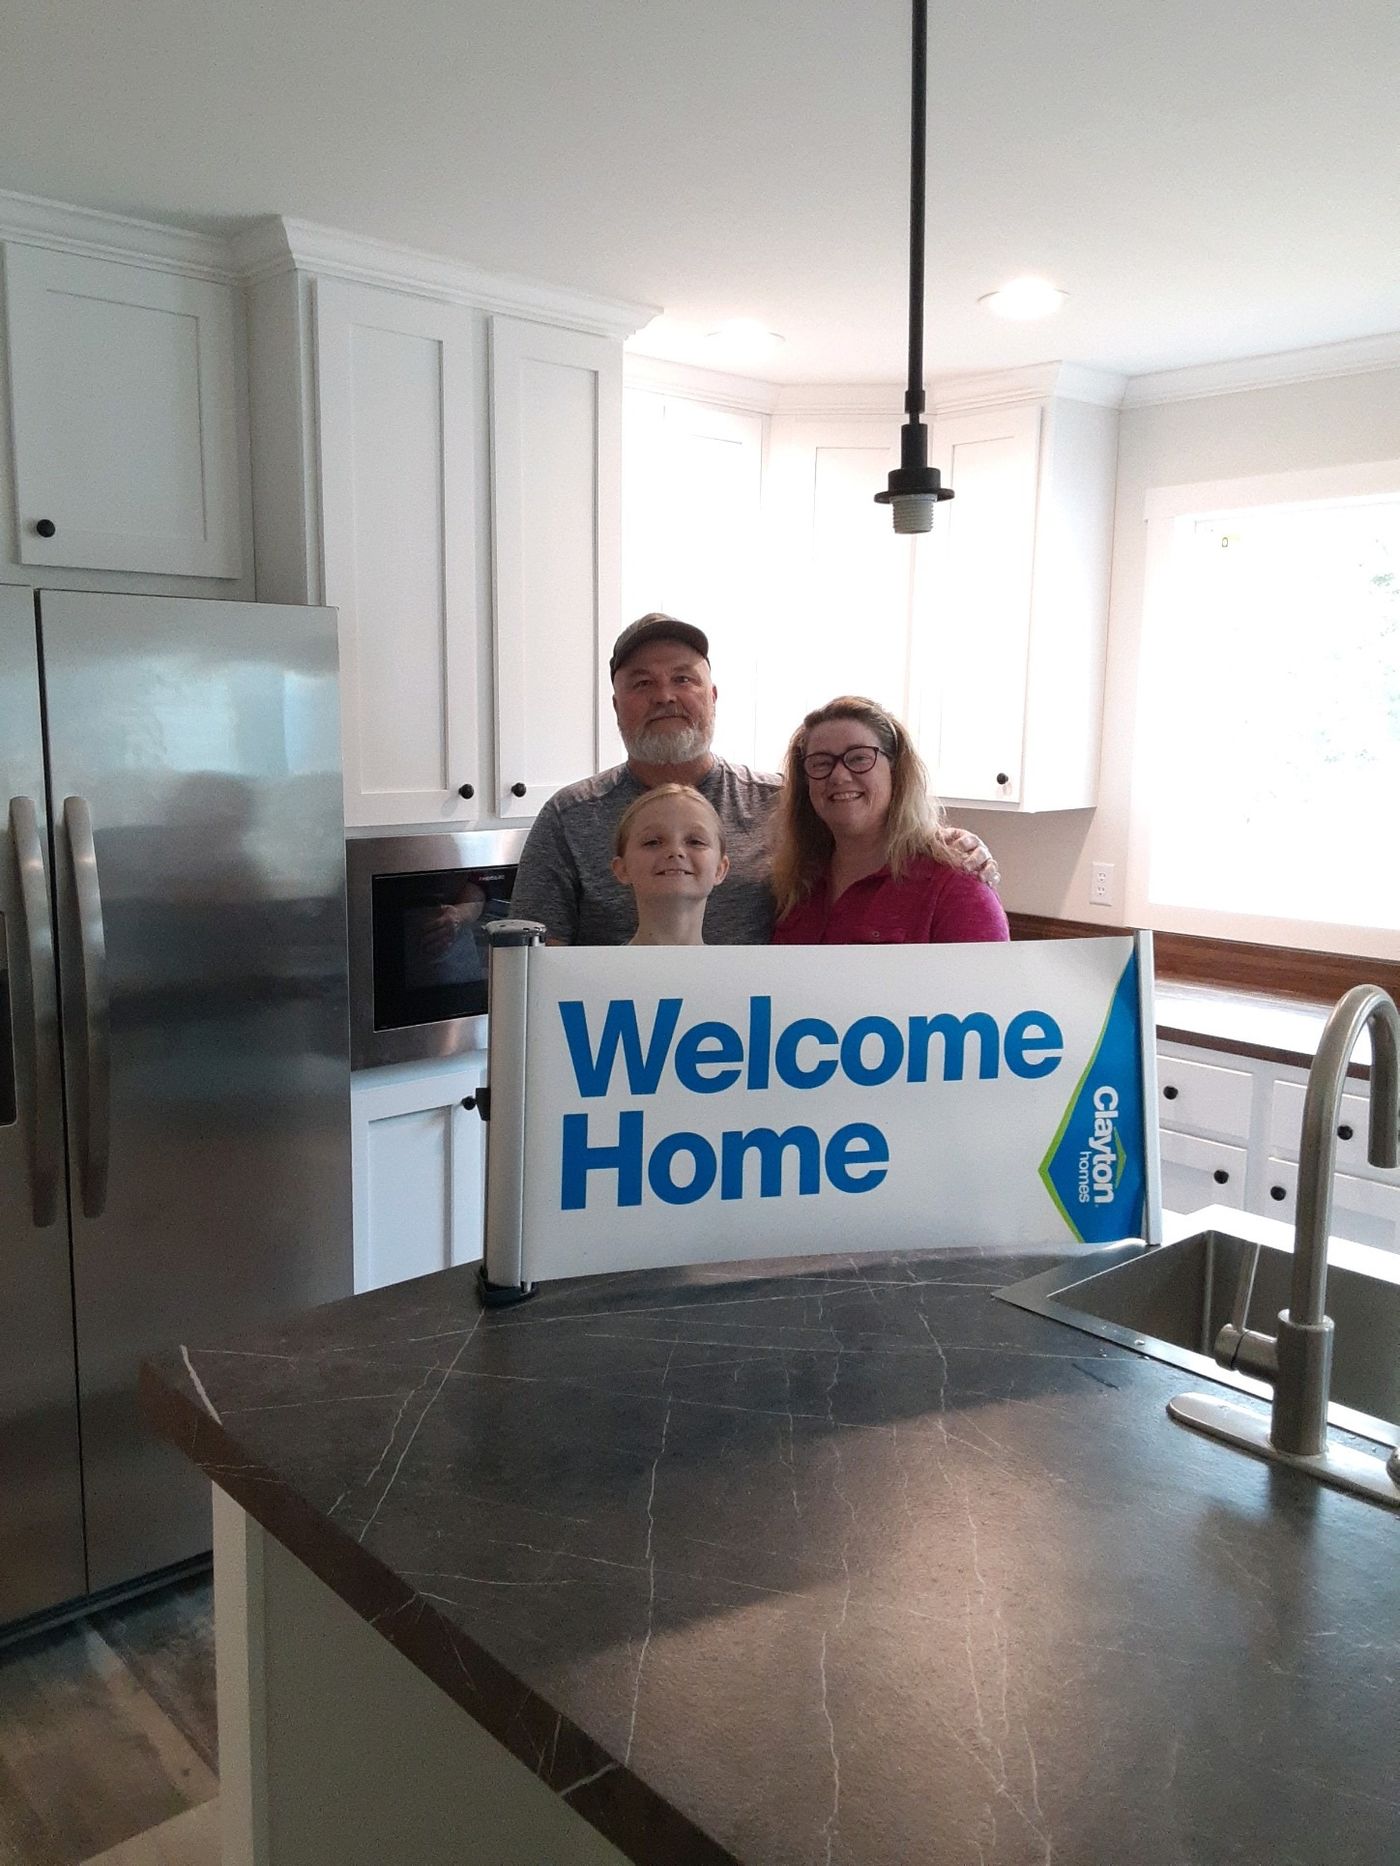 SCOTT L. welcome home image